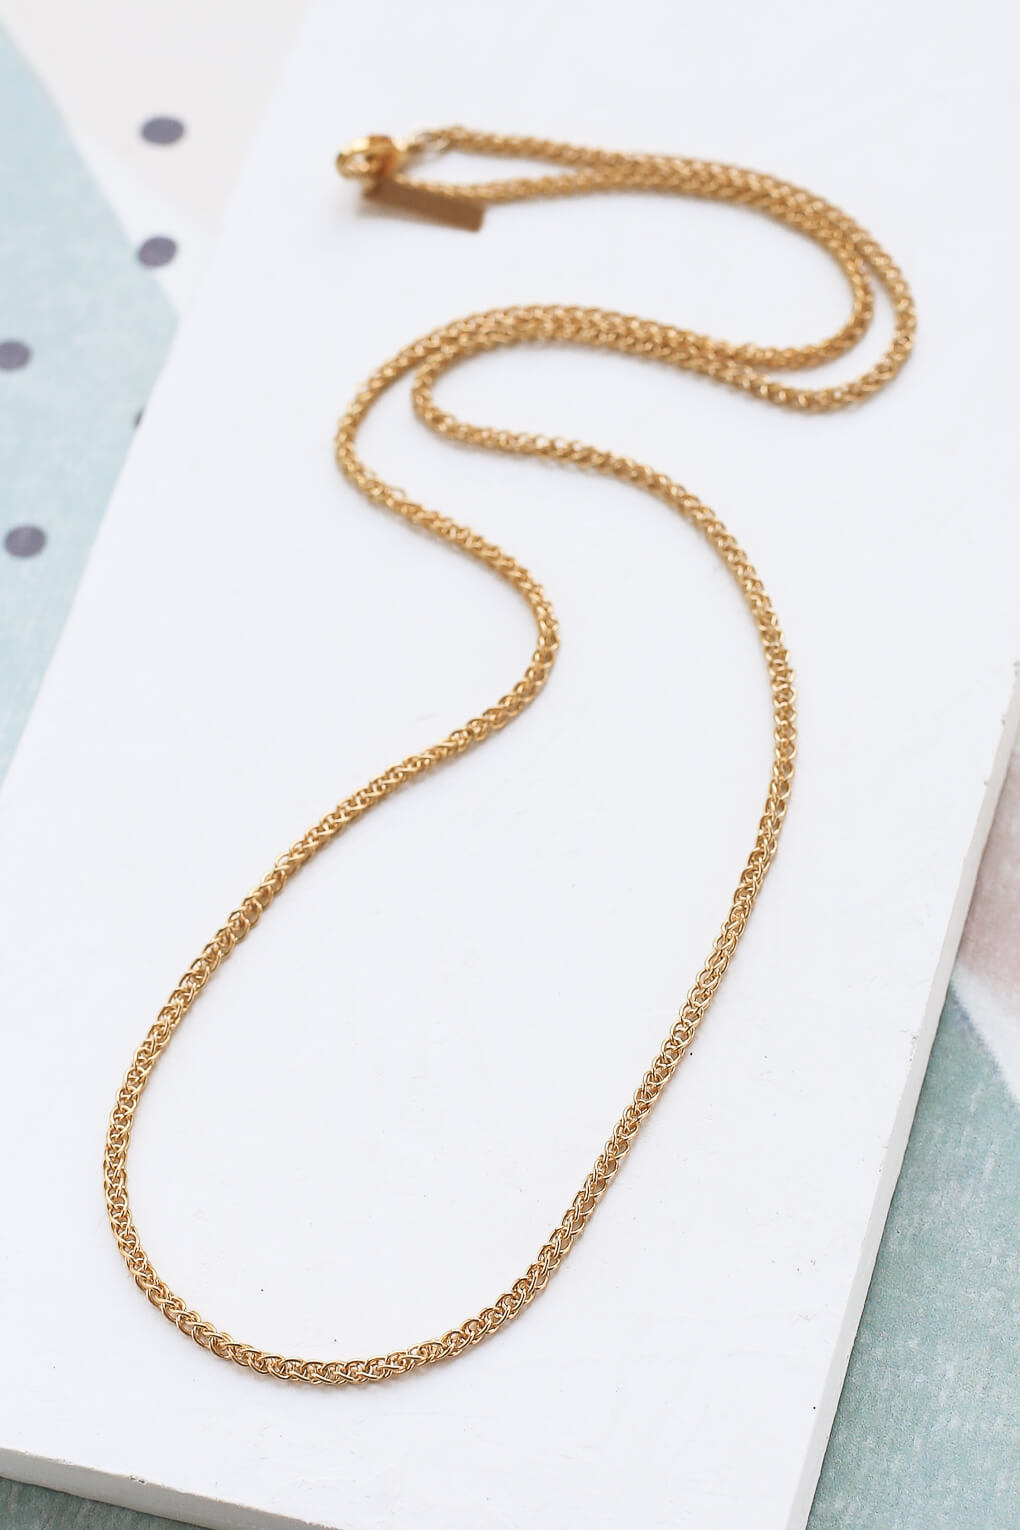 Basic Knitted Necklace